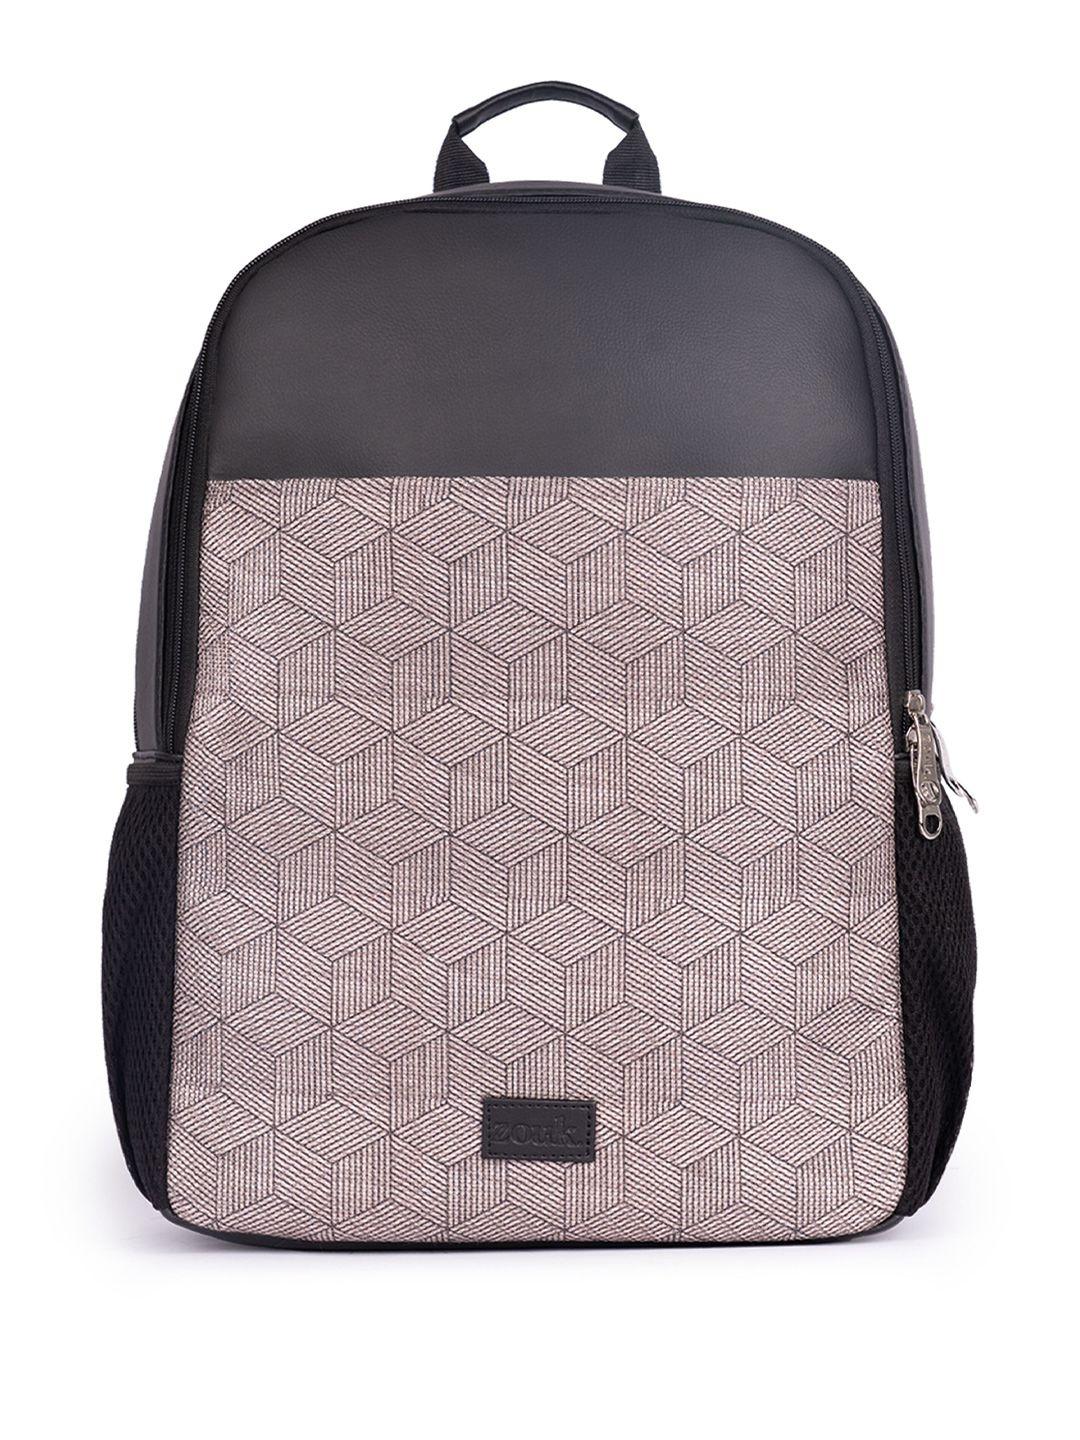 zouk unisex geometric printed water resistance backpack up to 16 inch